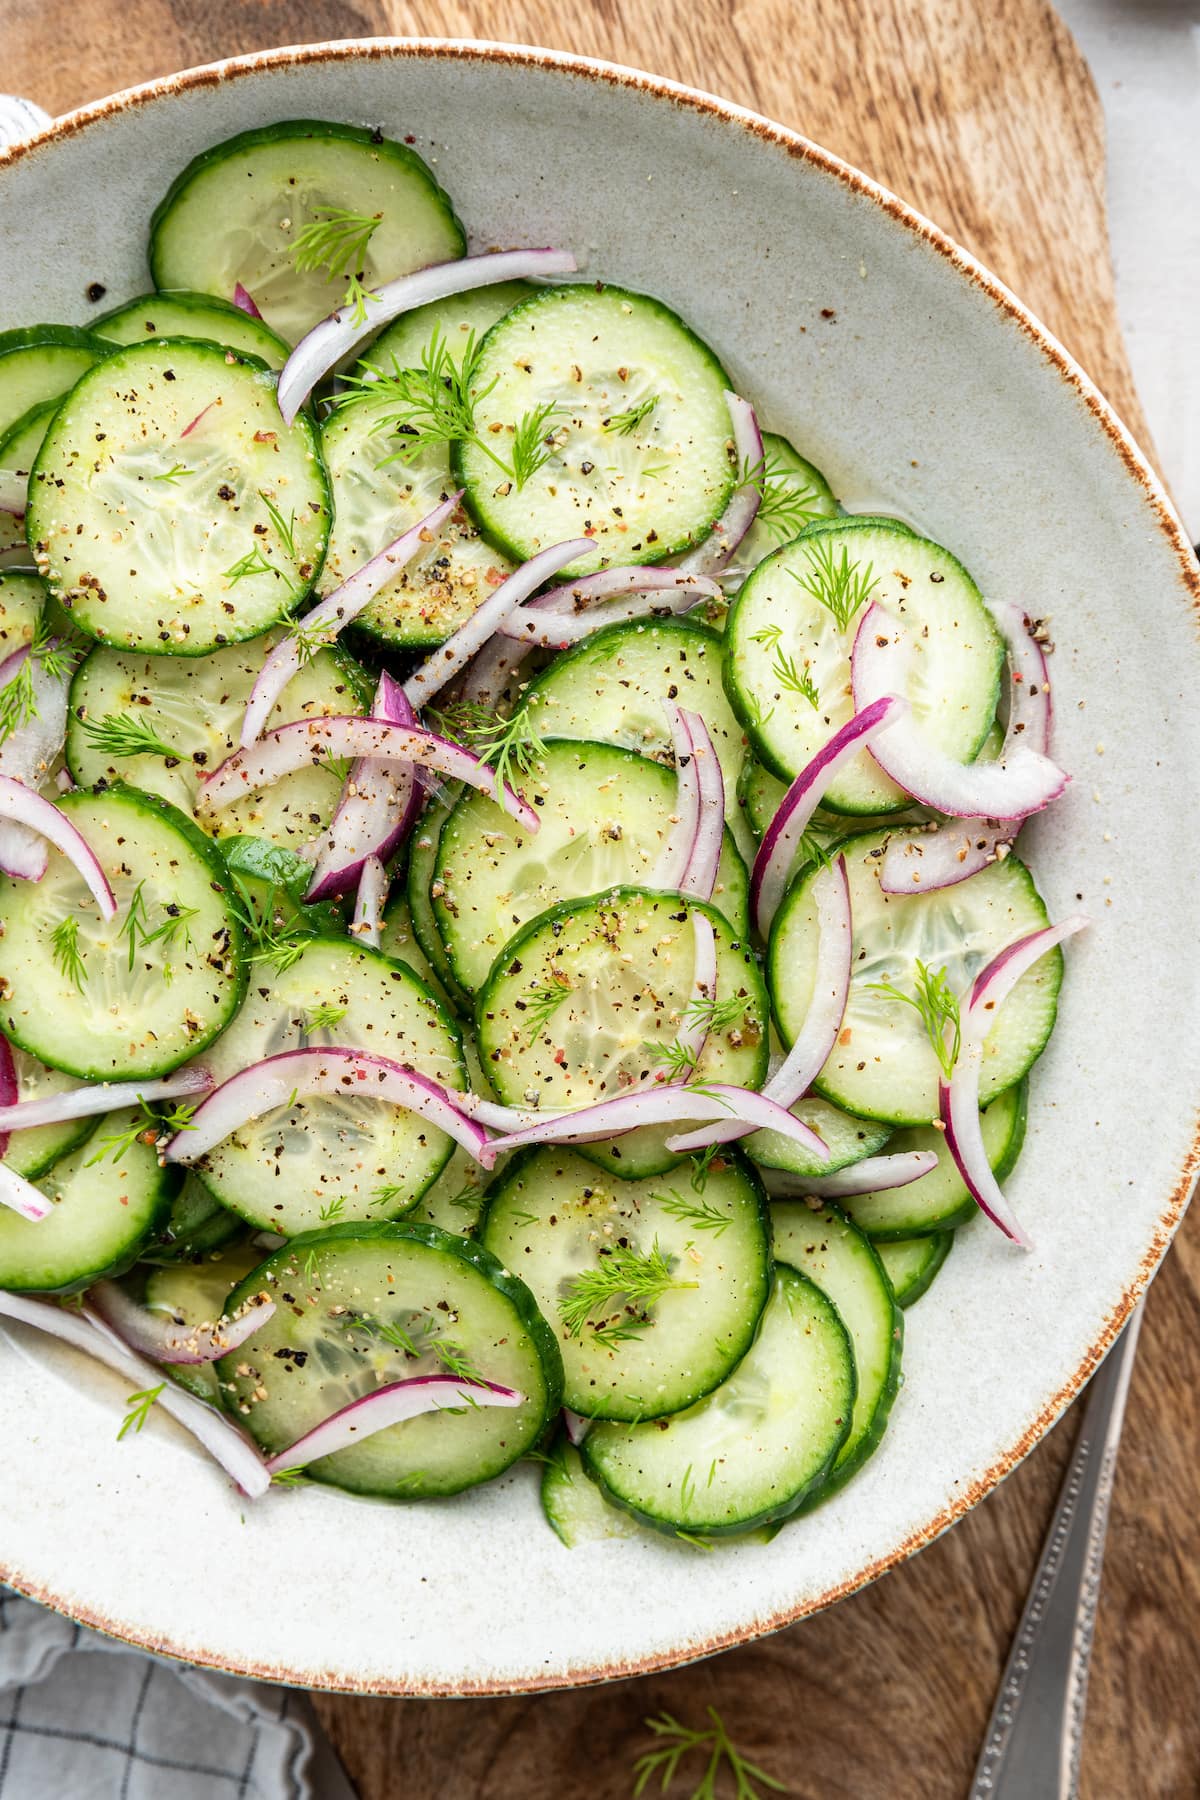 Cucumber salad in a white bowl with cucumber slices, red onion and vinaigrette.